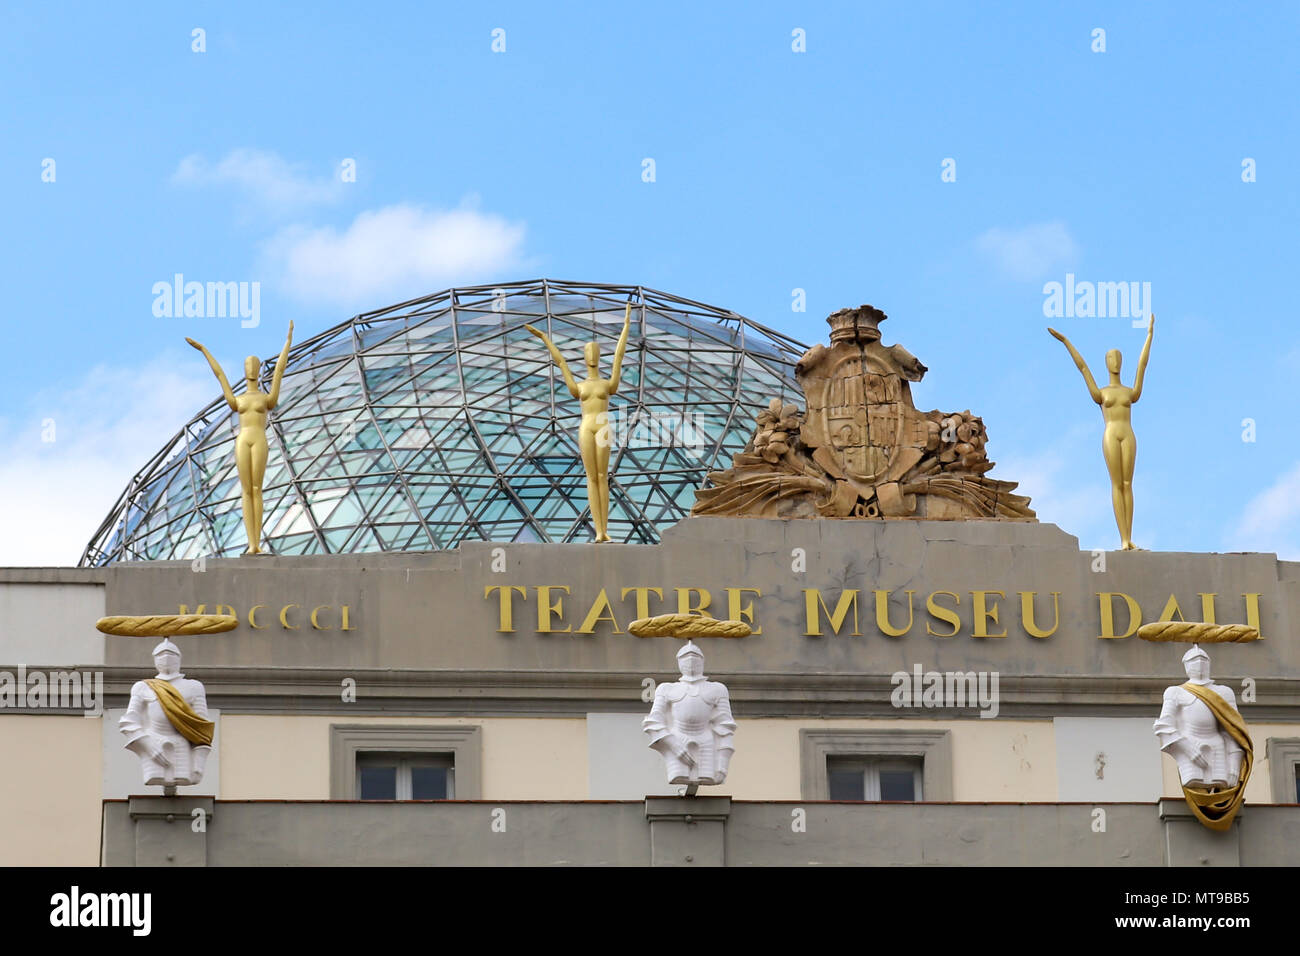 Glass dome and gold statues adorn the top of the Salvador Dali Theatre Museum at the entrance. Figueres, Girona, Catelonia, Spain. Stock Photo